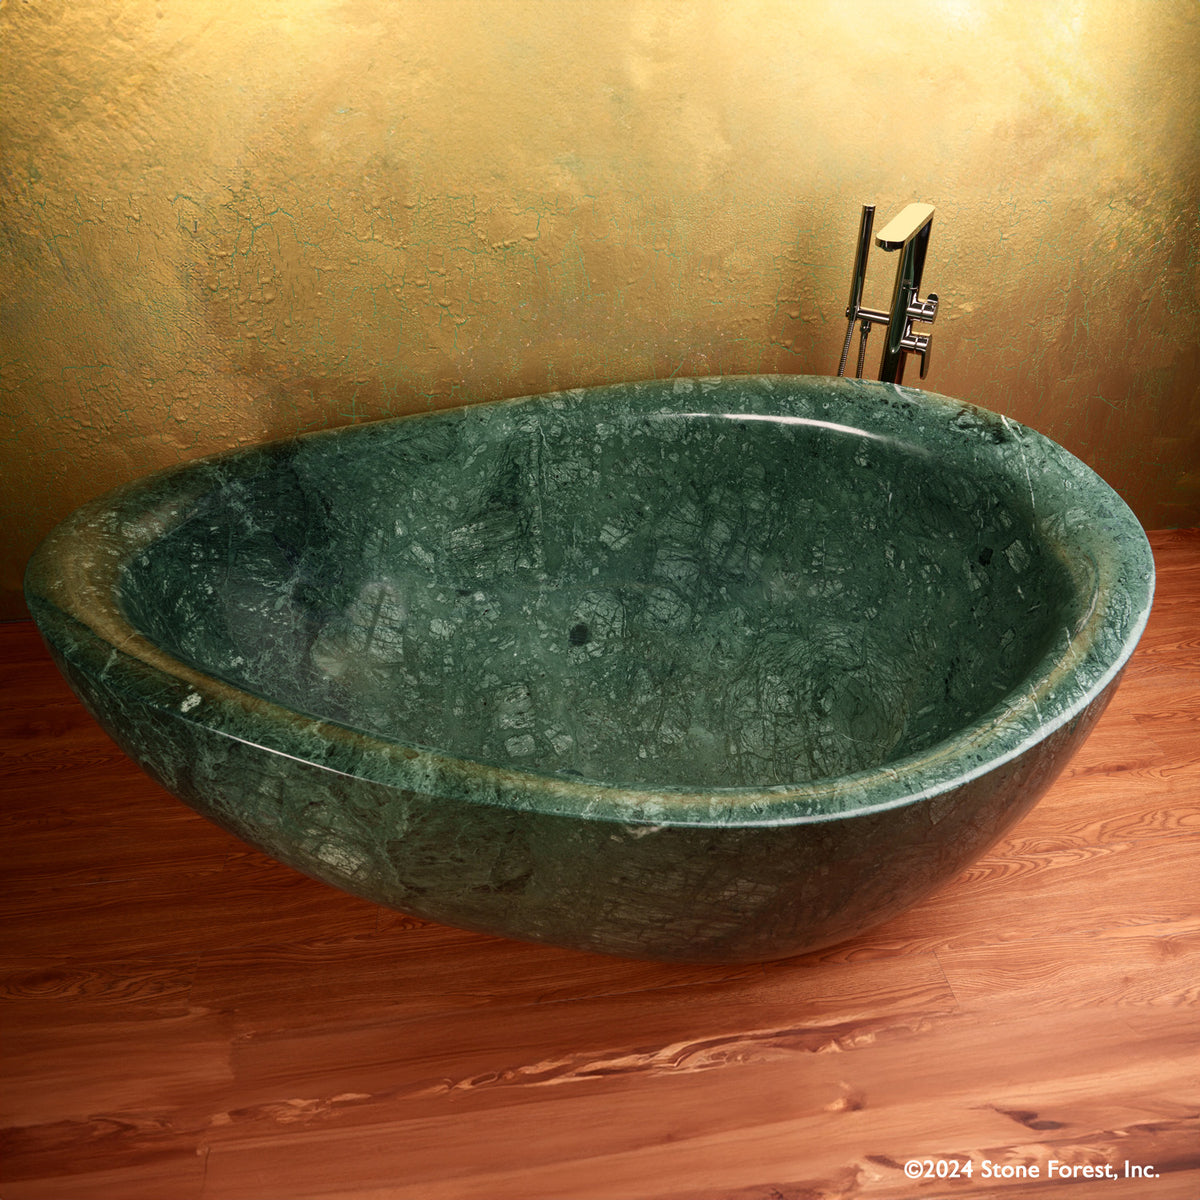 Stone Forest free standing  Papillon Bathtub in verde indio marble image 3 of 11